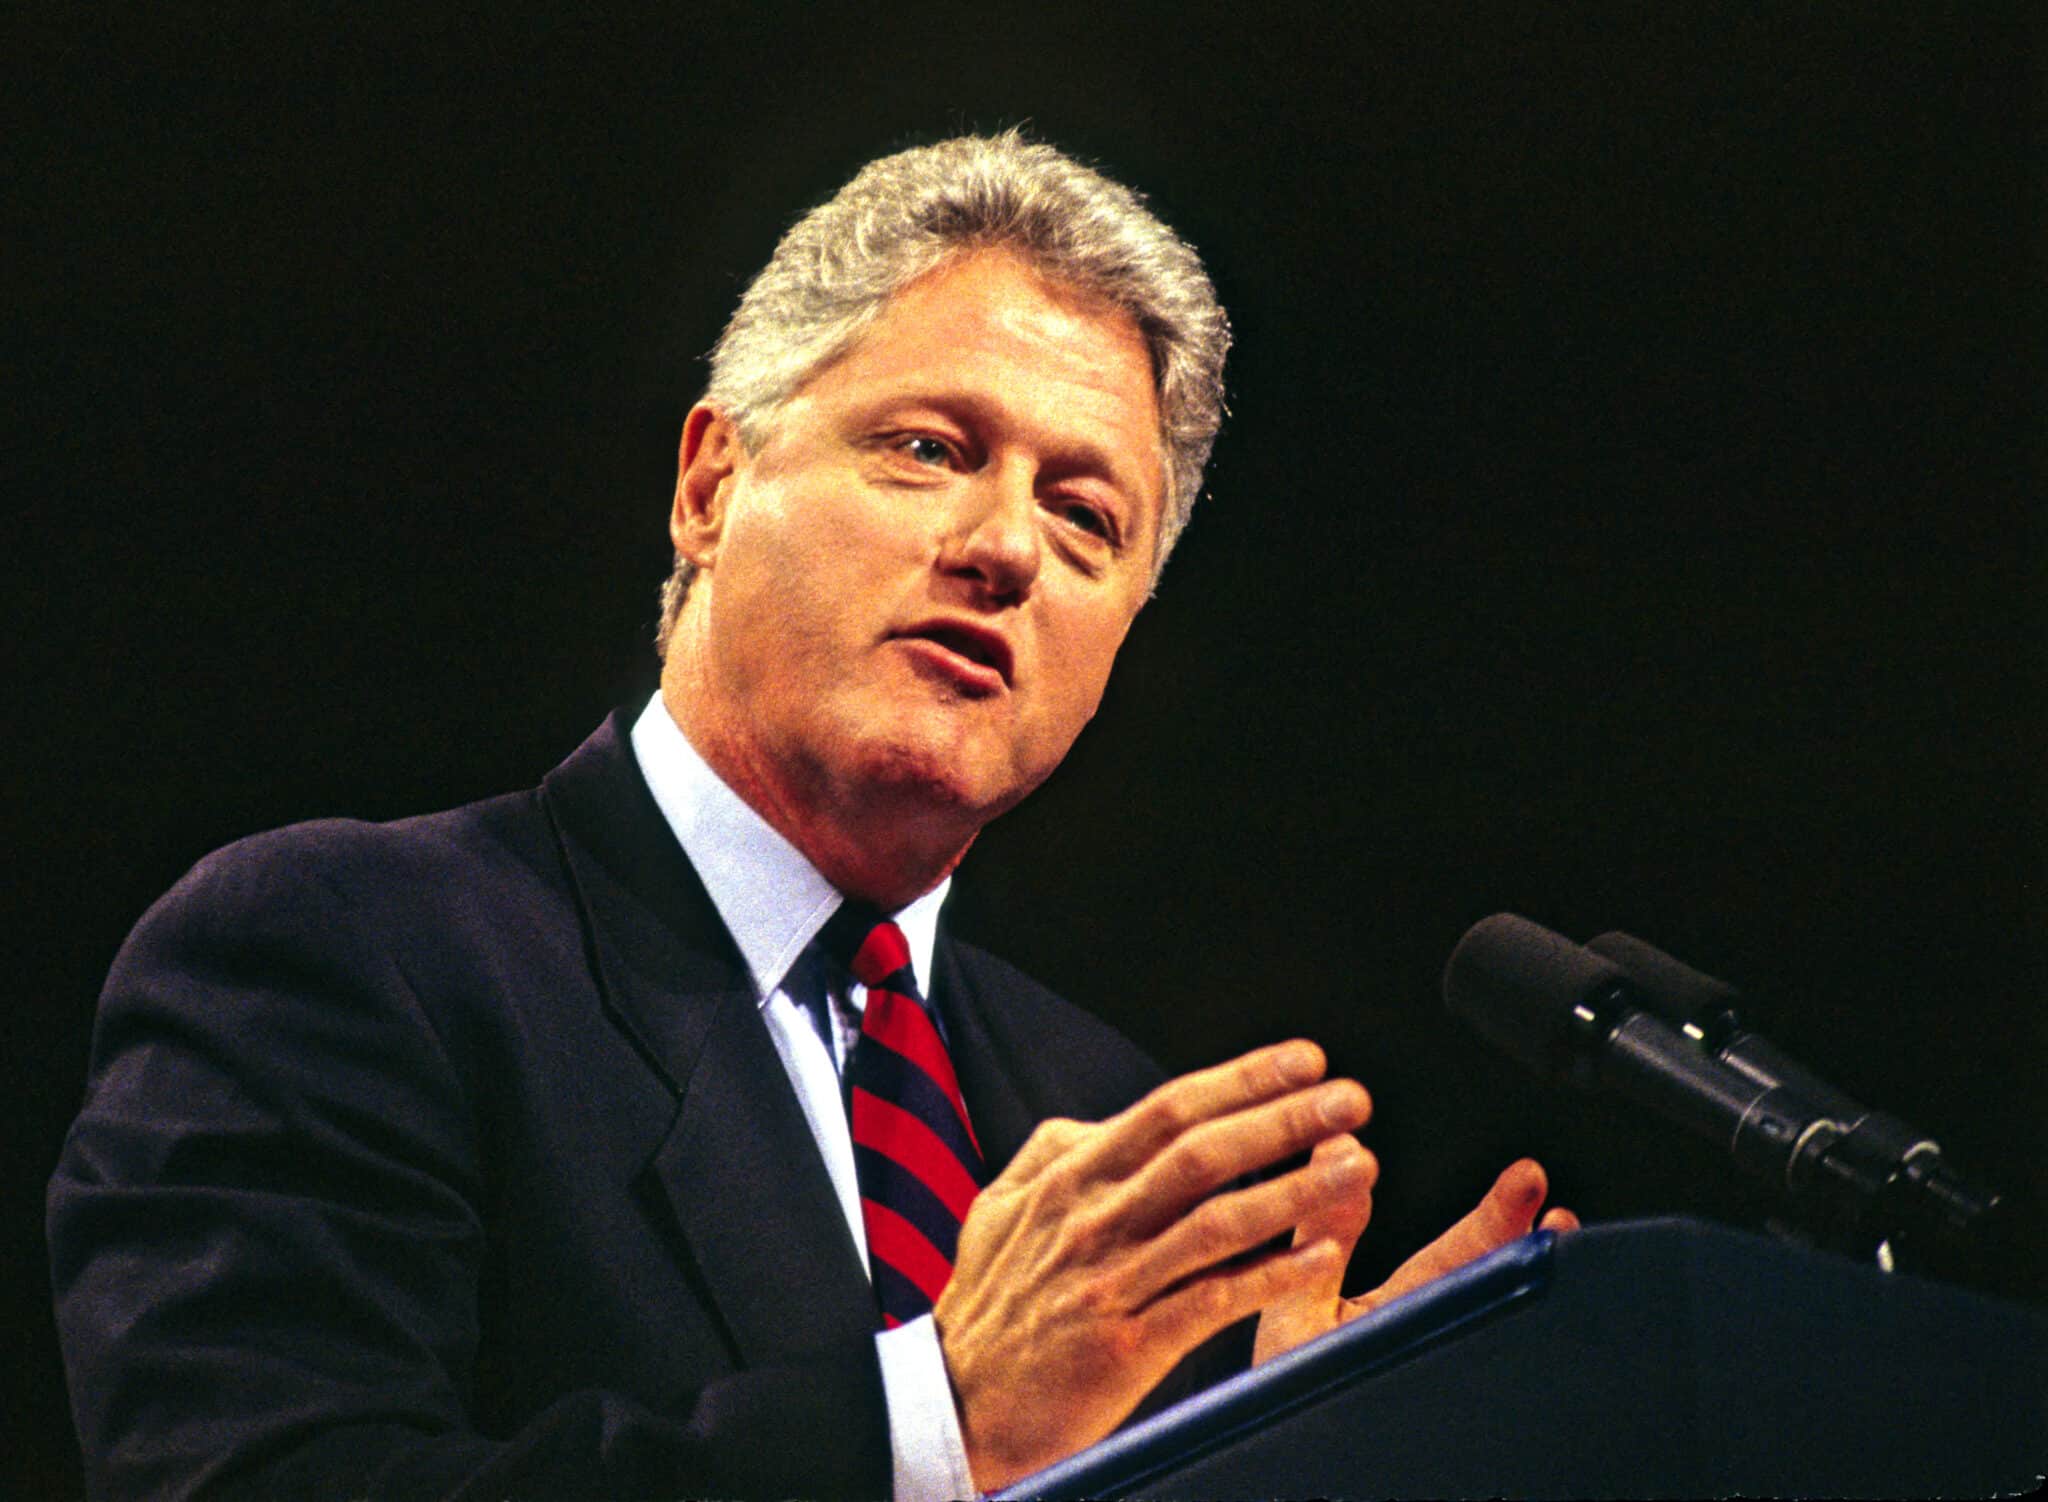 American politician US President Bill Clinton speaks from a podium at the Democratic Leadership Council's (DLC) 1995 Annual Conference in the Washington Convention Center, Washington DC, November 13, 1995. 